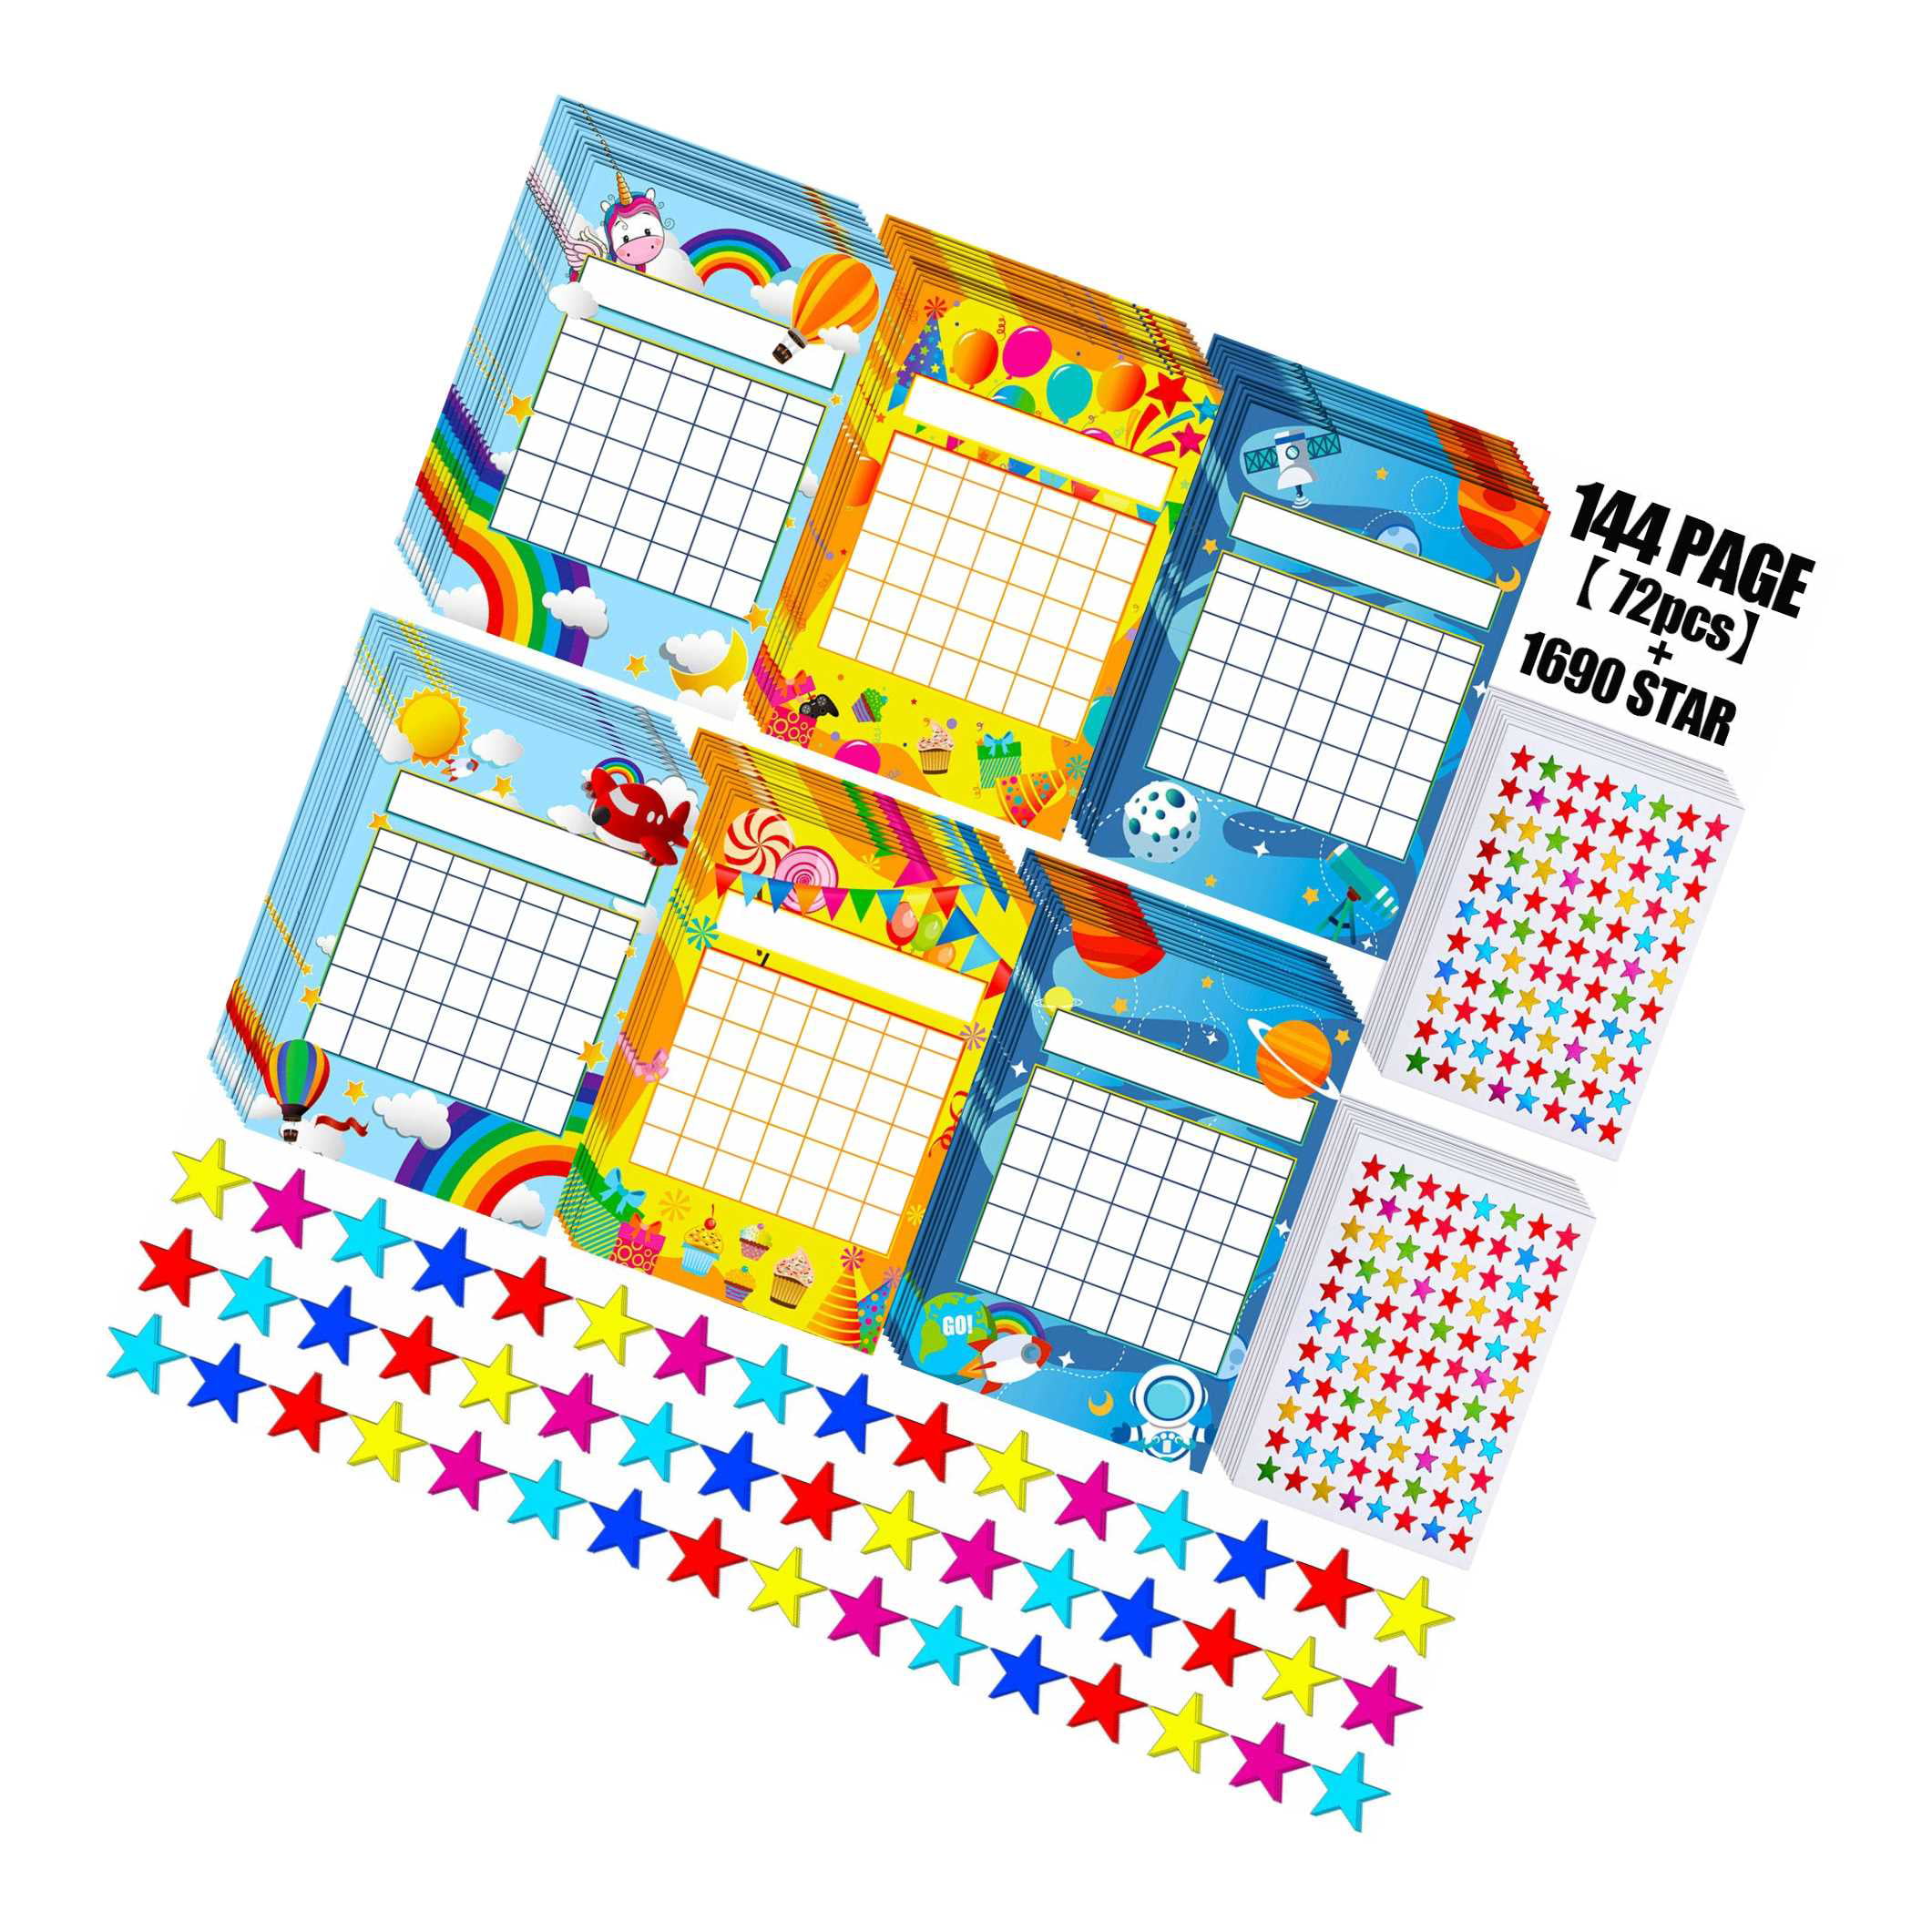 Incentive Chart Colorful Rainbow Space Theme Party Incentive Pad and 1760 Colorful Star Stickers for Classroom Teaching or Family Using 122